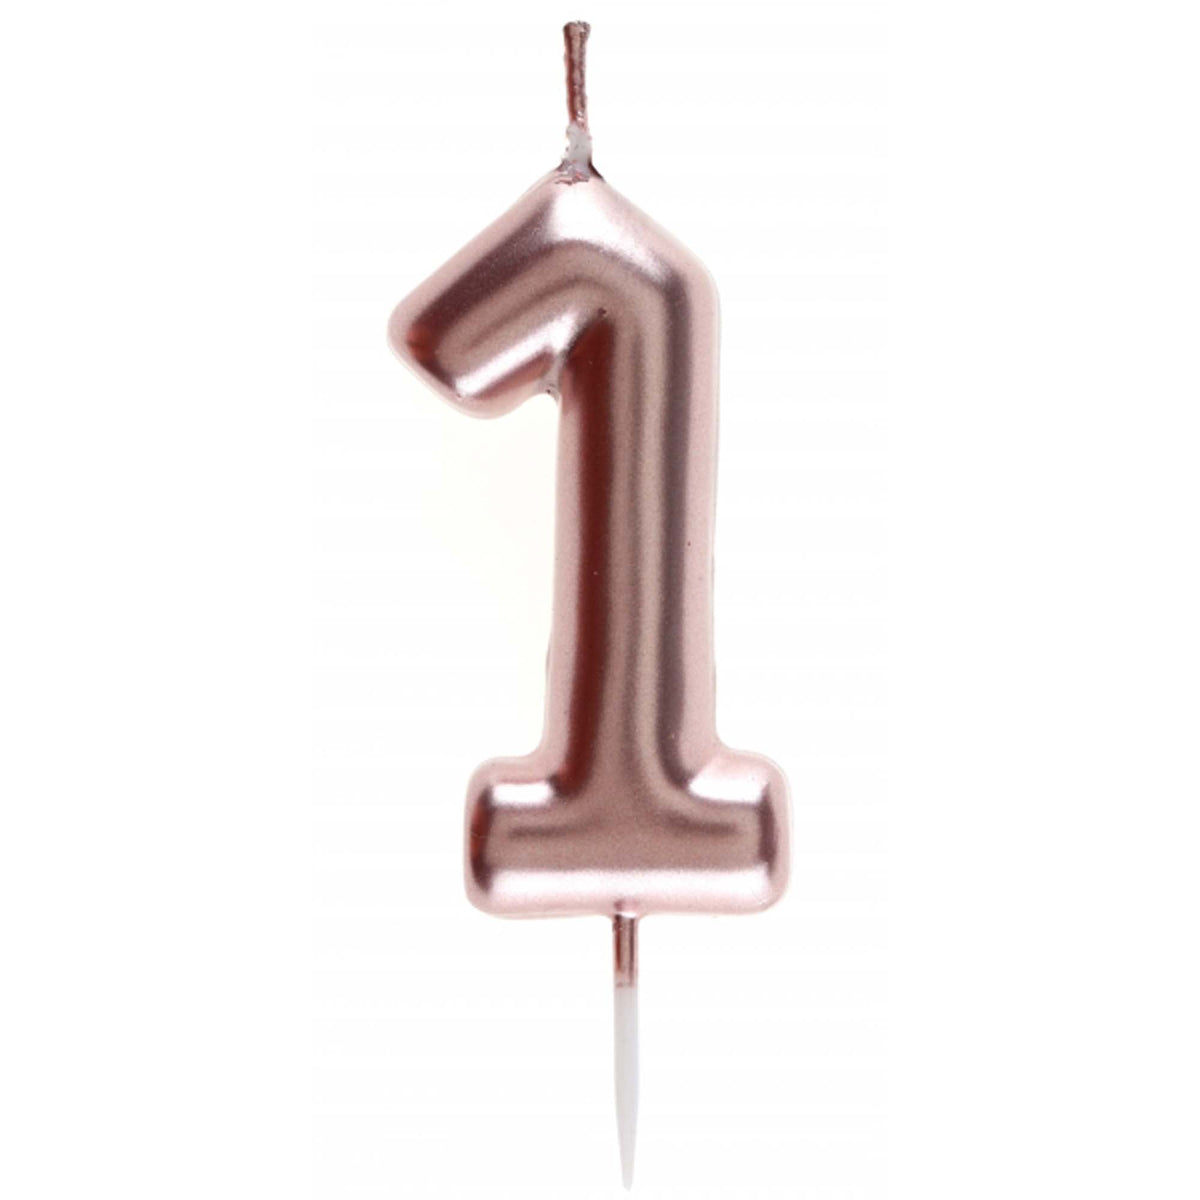 SANTEX Cake Supplies Rose Gold Number 1 Birthday Candle, 1 Count 3660380068785